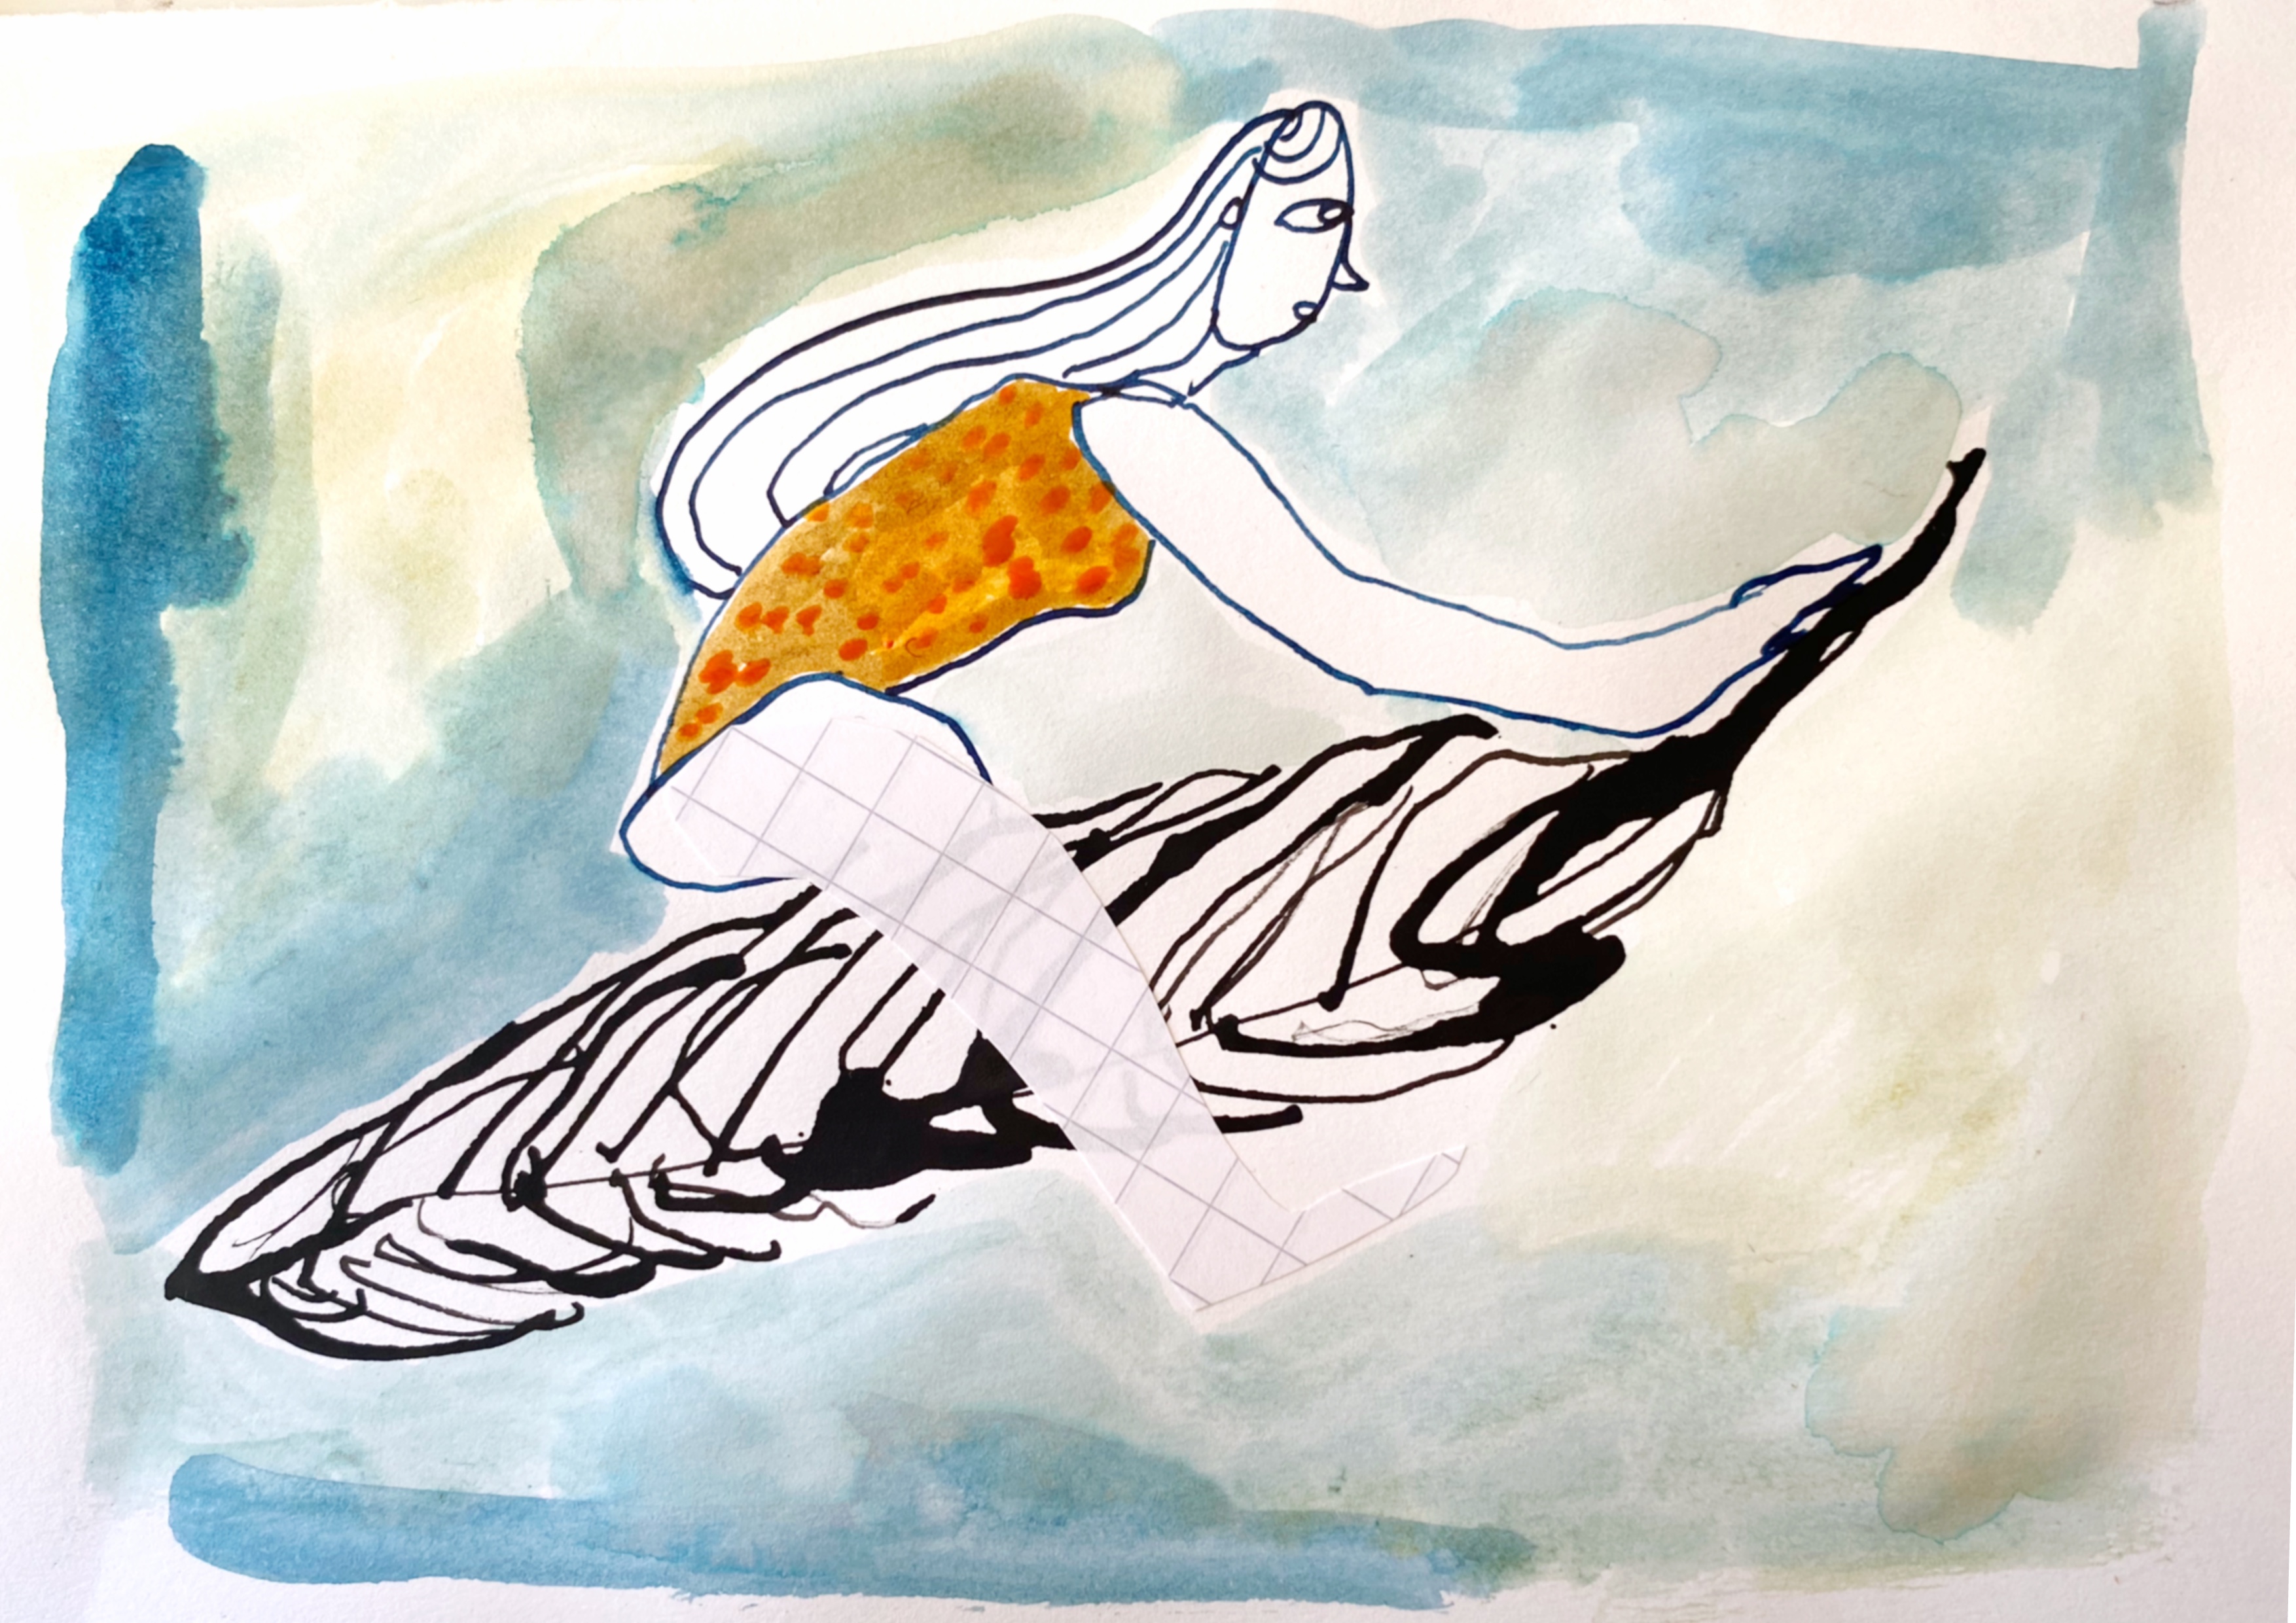 A figure in flight through the sky. She is riding a feather.